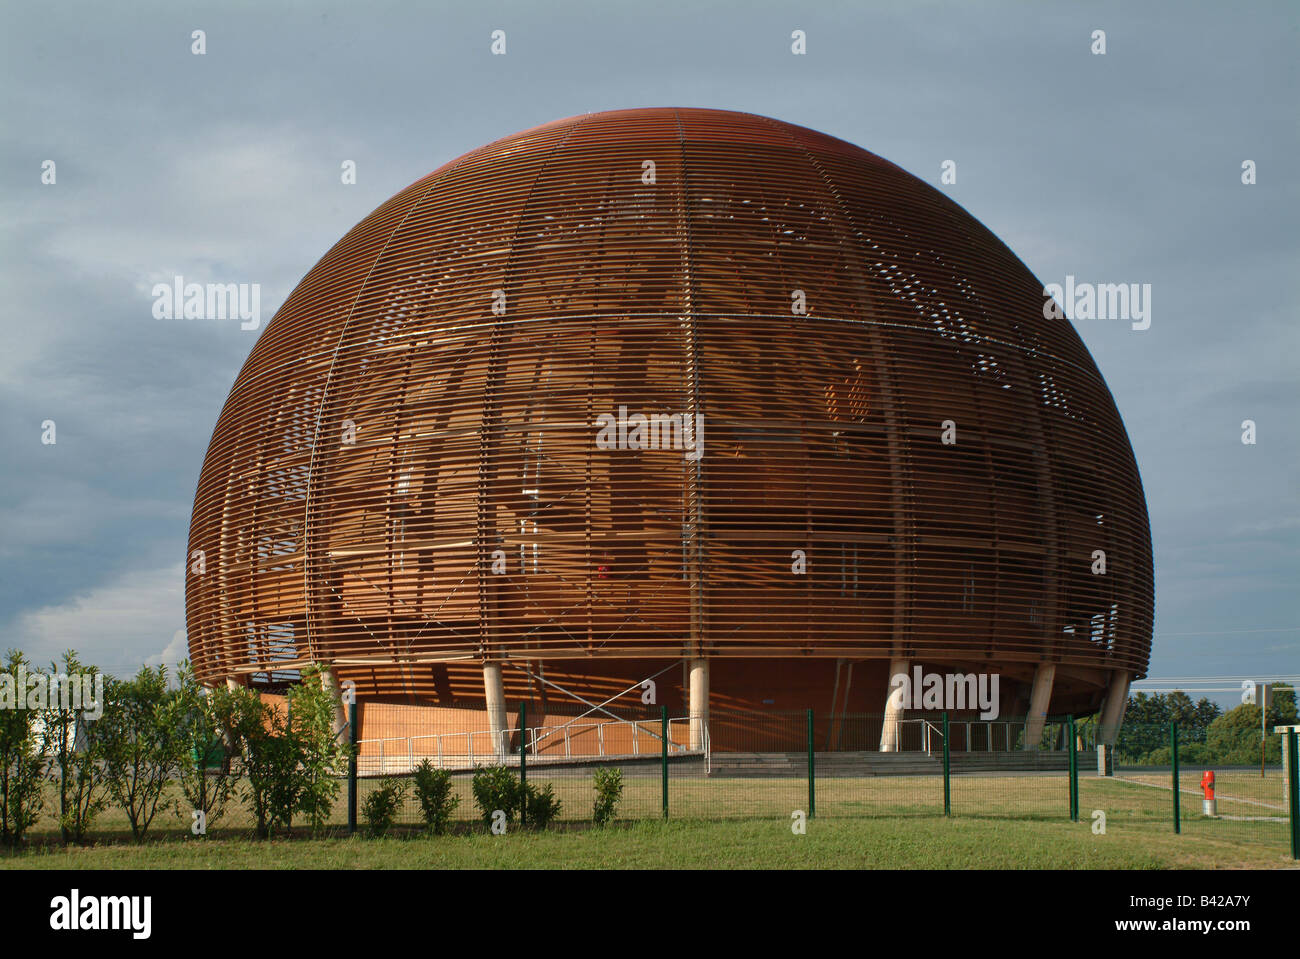 Palais de l'Equilibre, Globe of Science and Innovation, Globe de Science et lInnovation, C.E.R.N., CERN, Meyrin, Geneve. Stock Photo